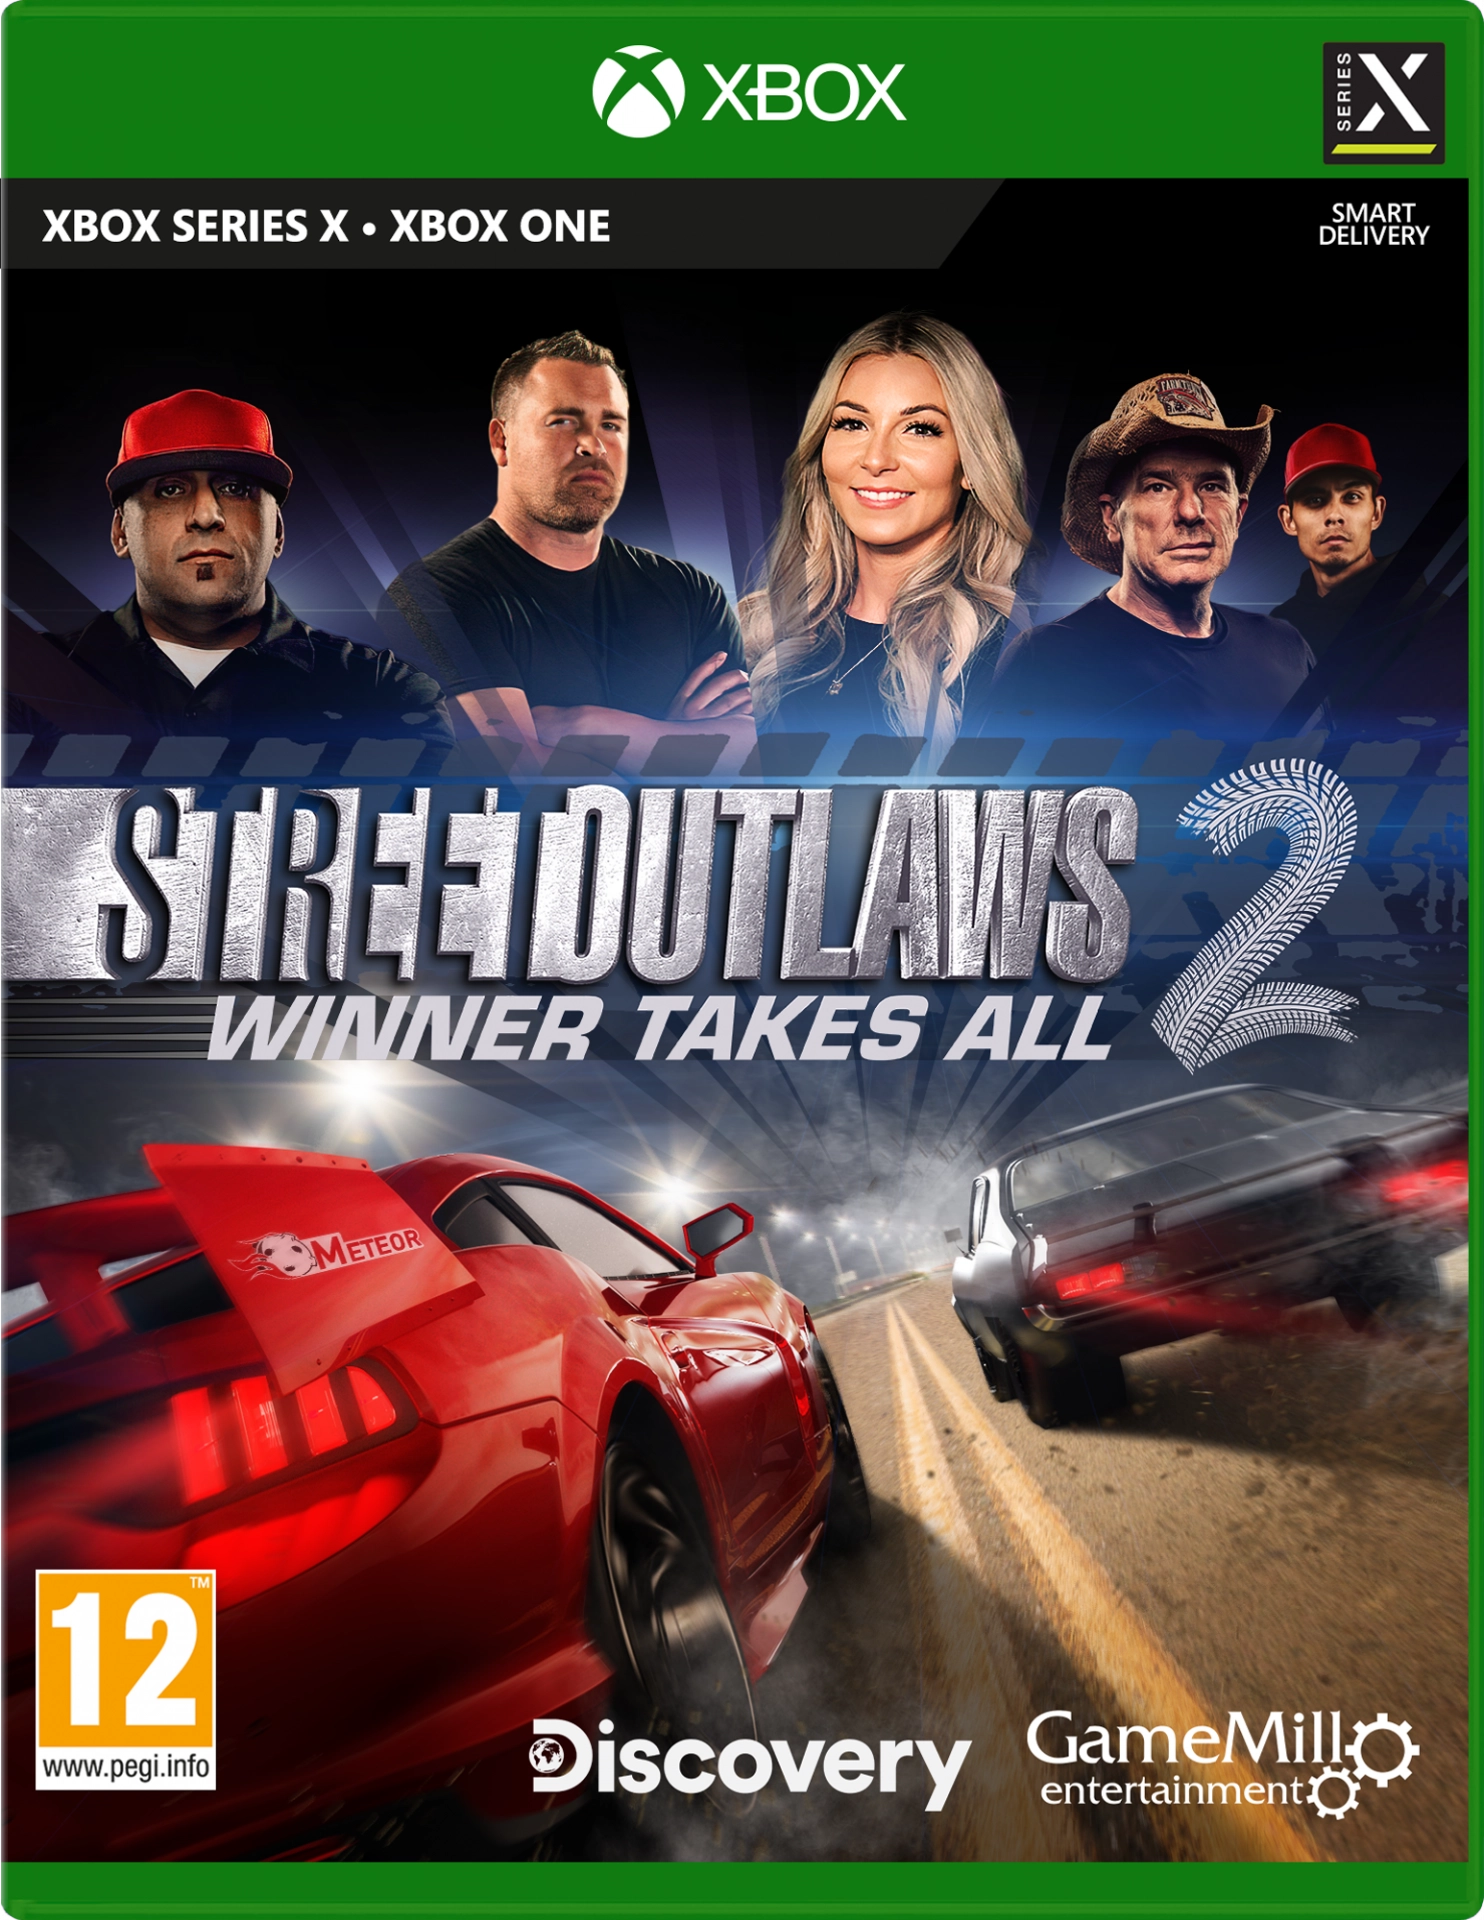 Street Outlaws 2: Winner Takes All (Xbox One), GameMill Entertainment